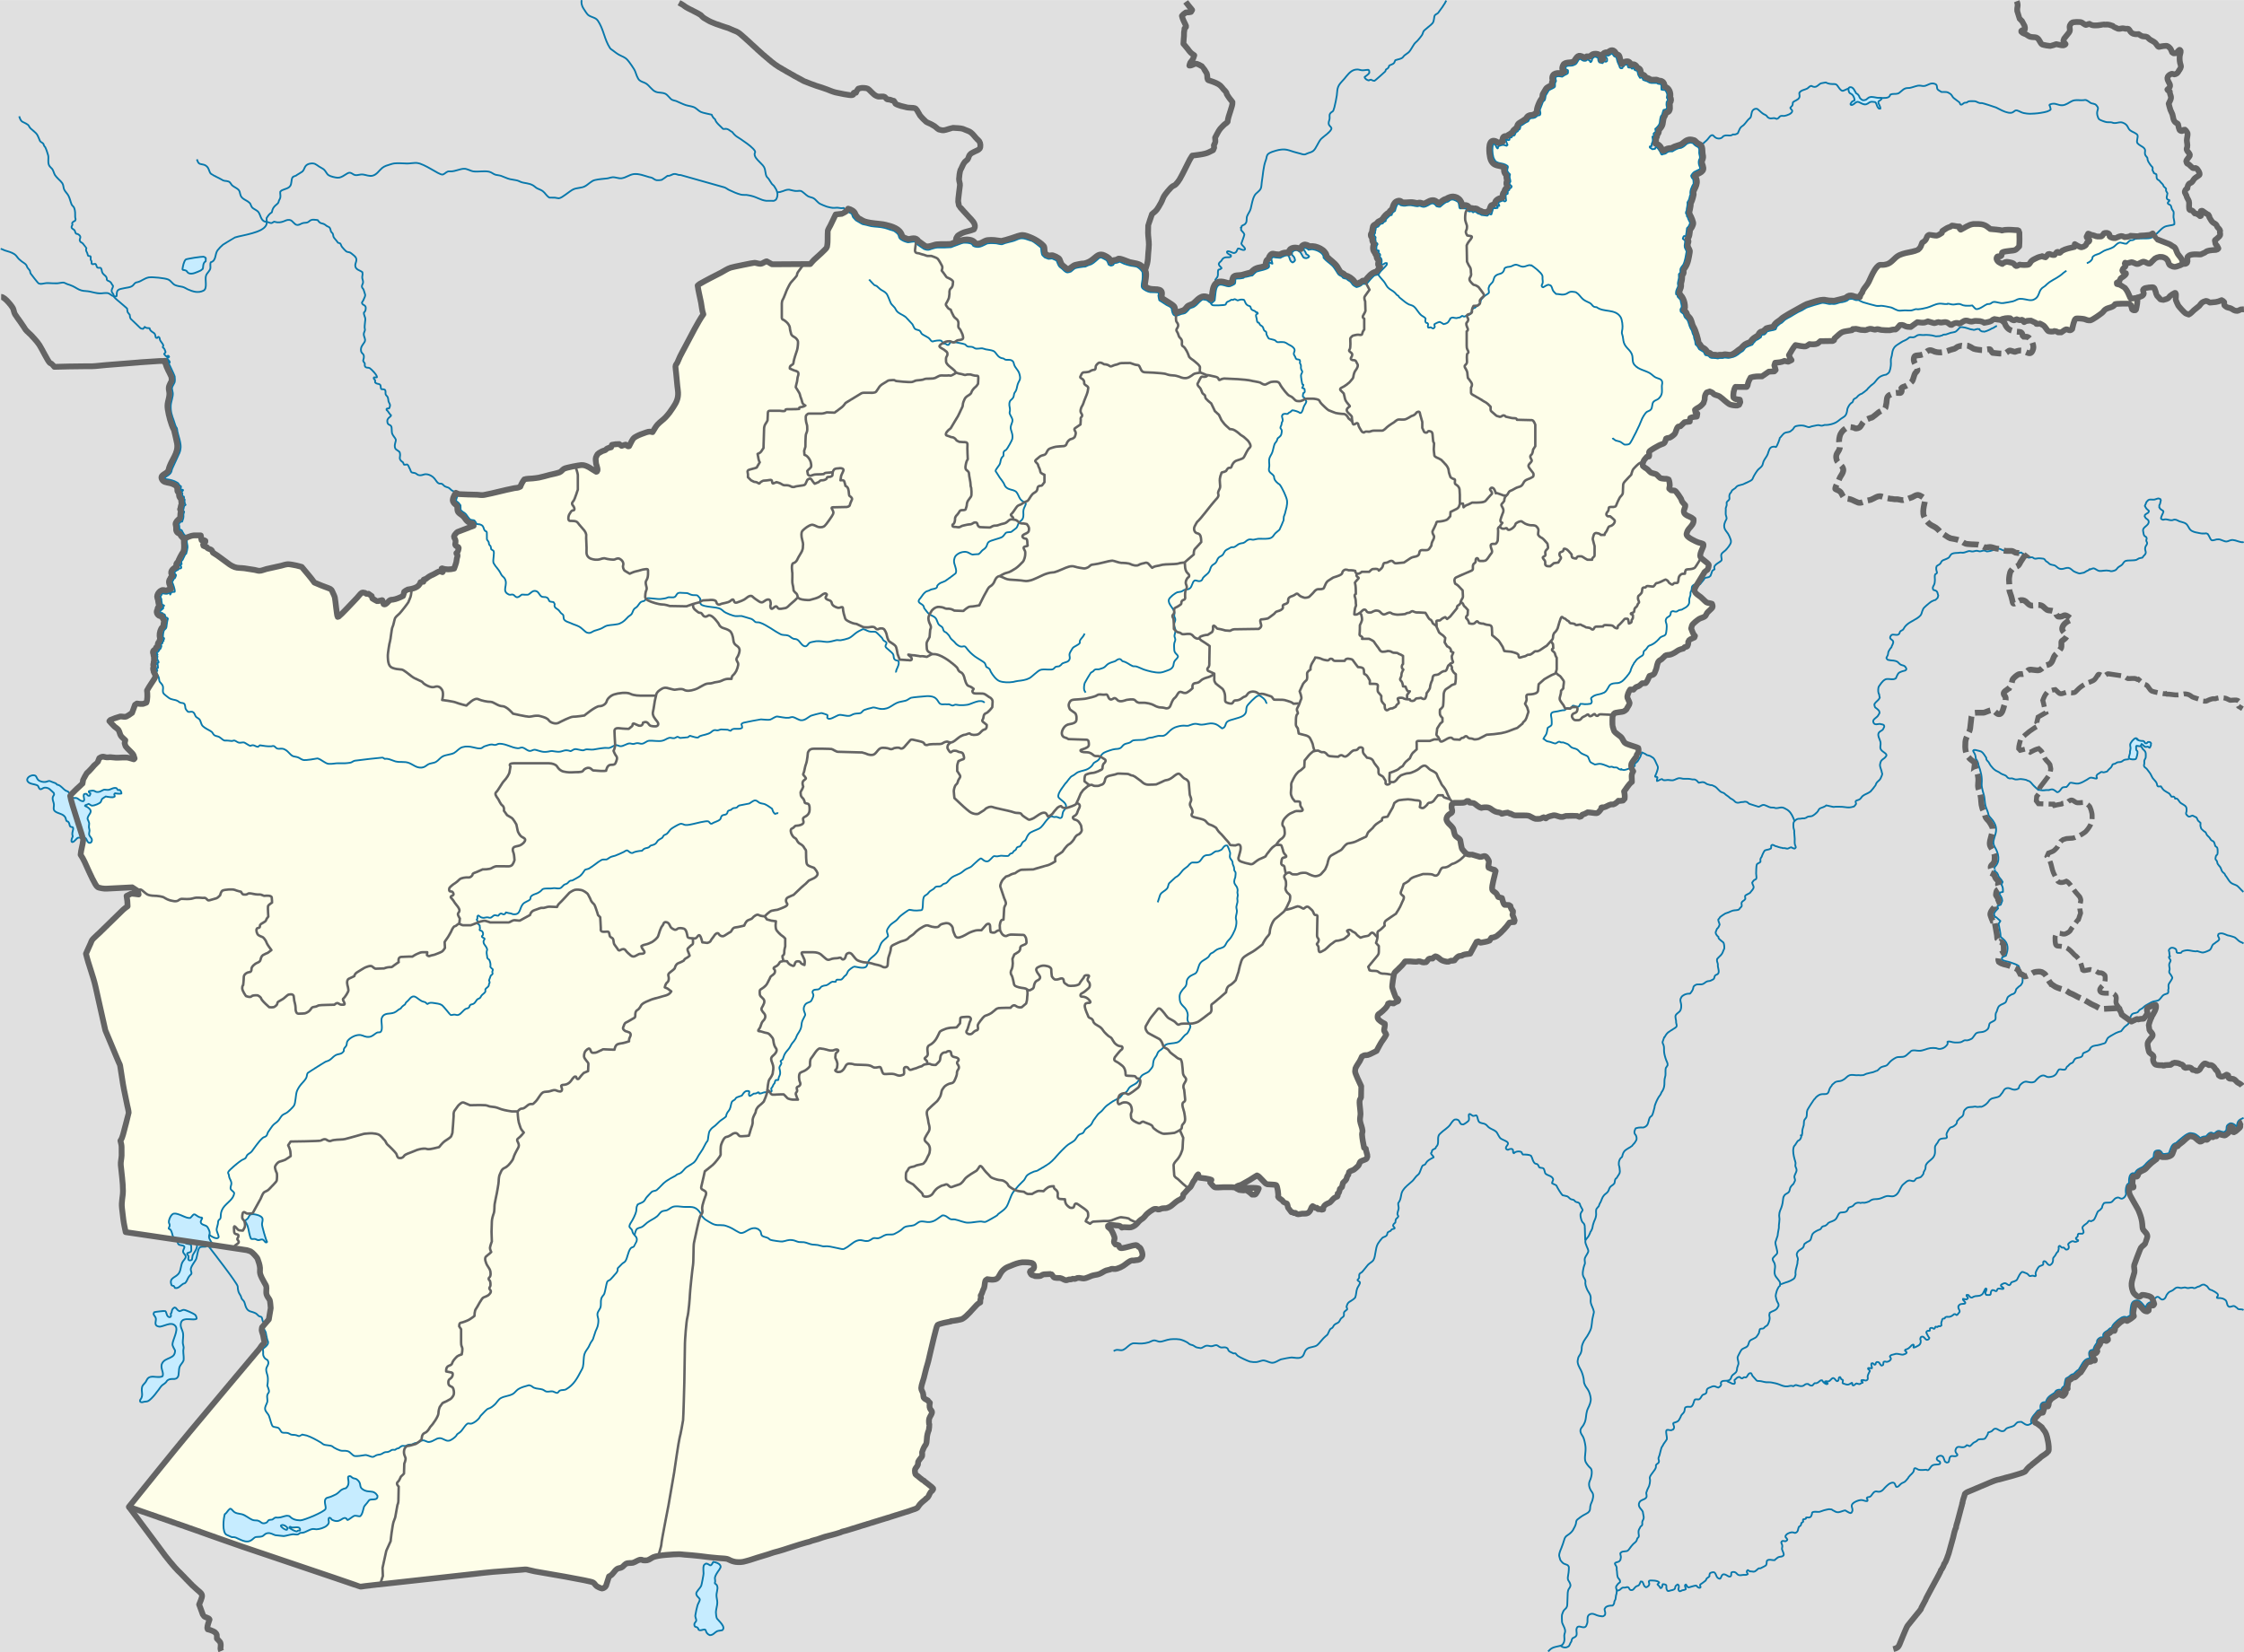 Map of Afghanistan. Credit: Wikipedia